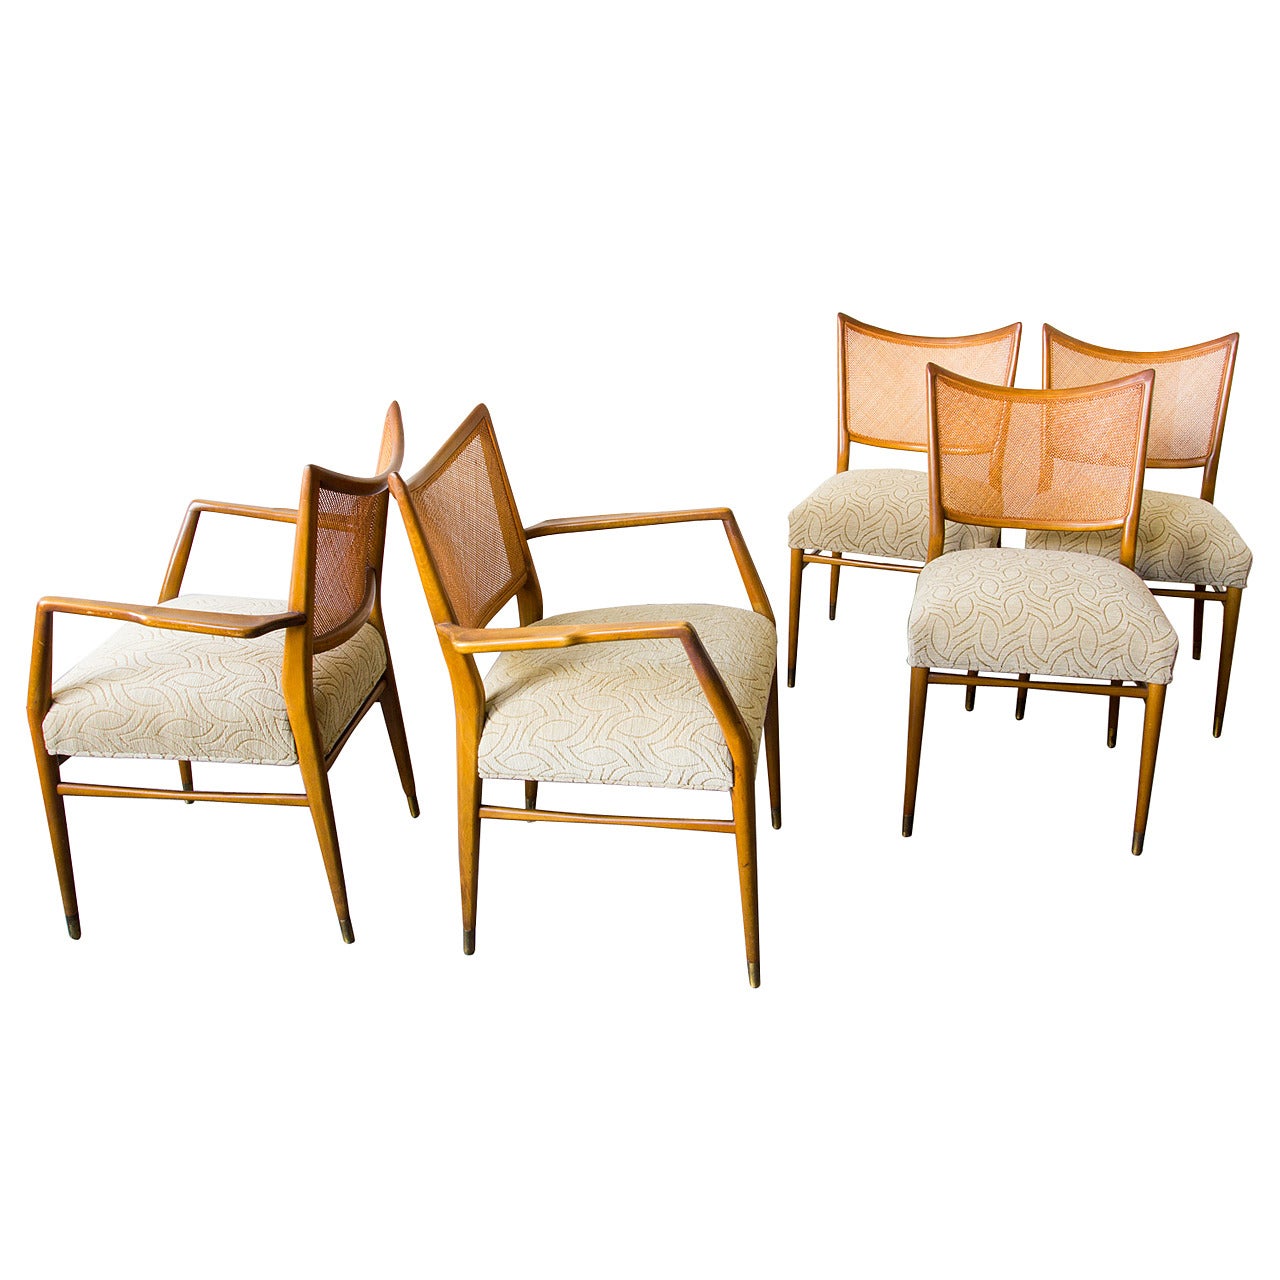 Sculptural Italian Dining Chairs